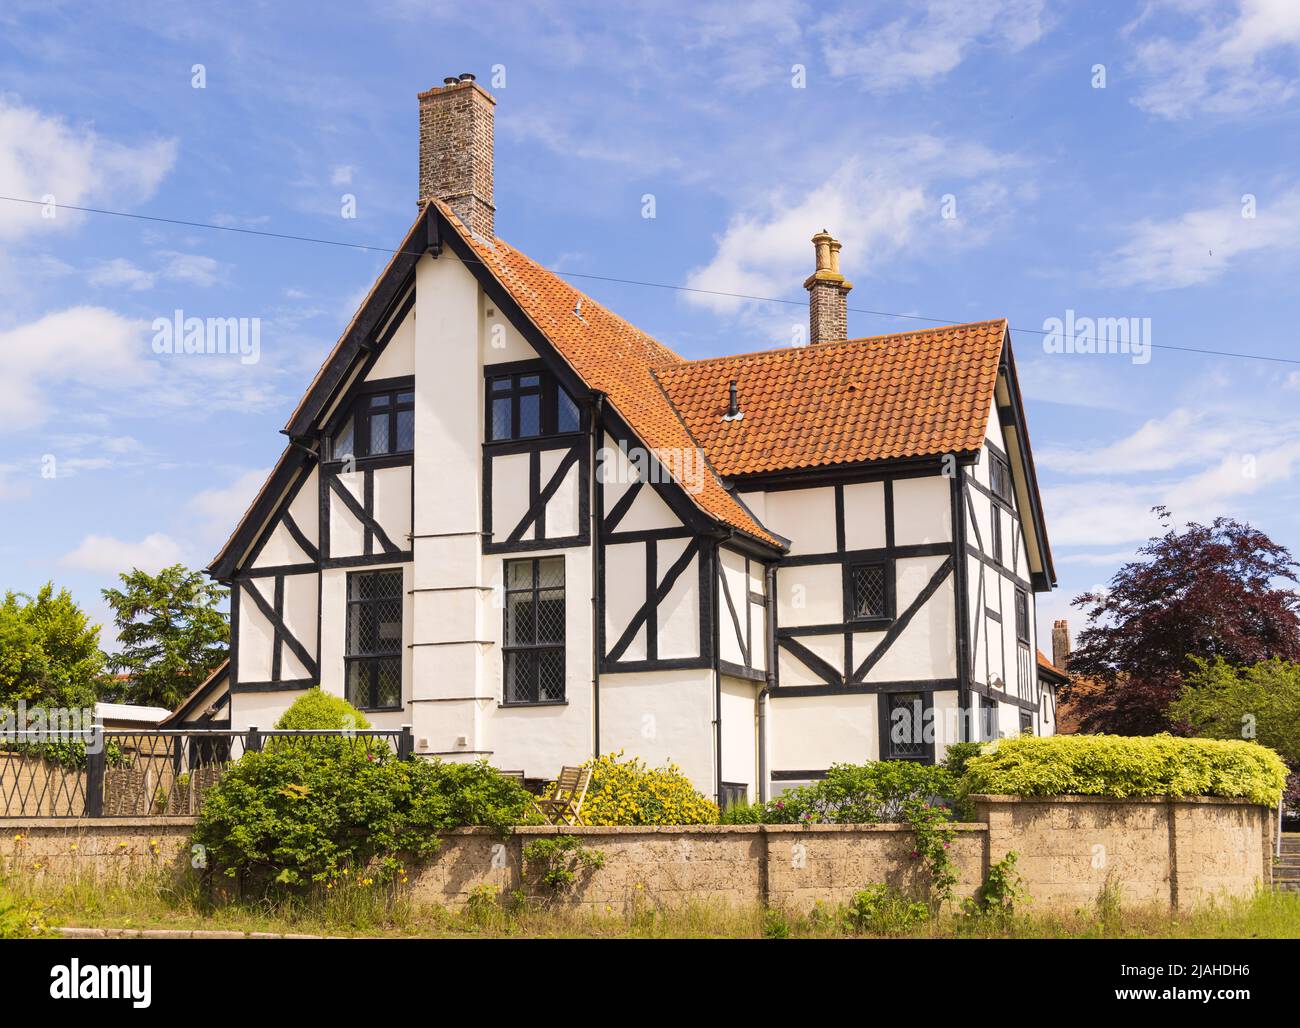 Attractive character houses in the village of Thorpeness, Suffolk. UK Stock Photo